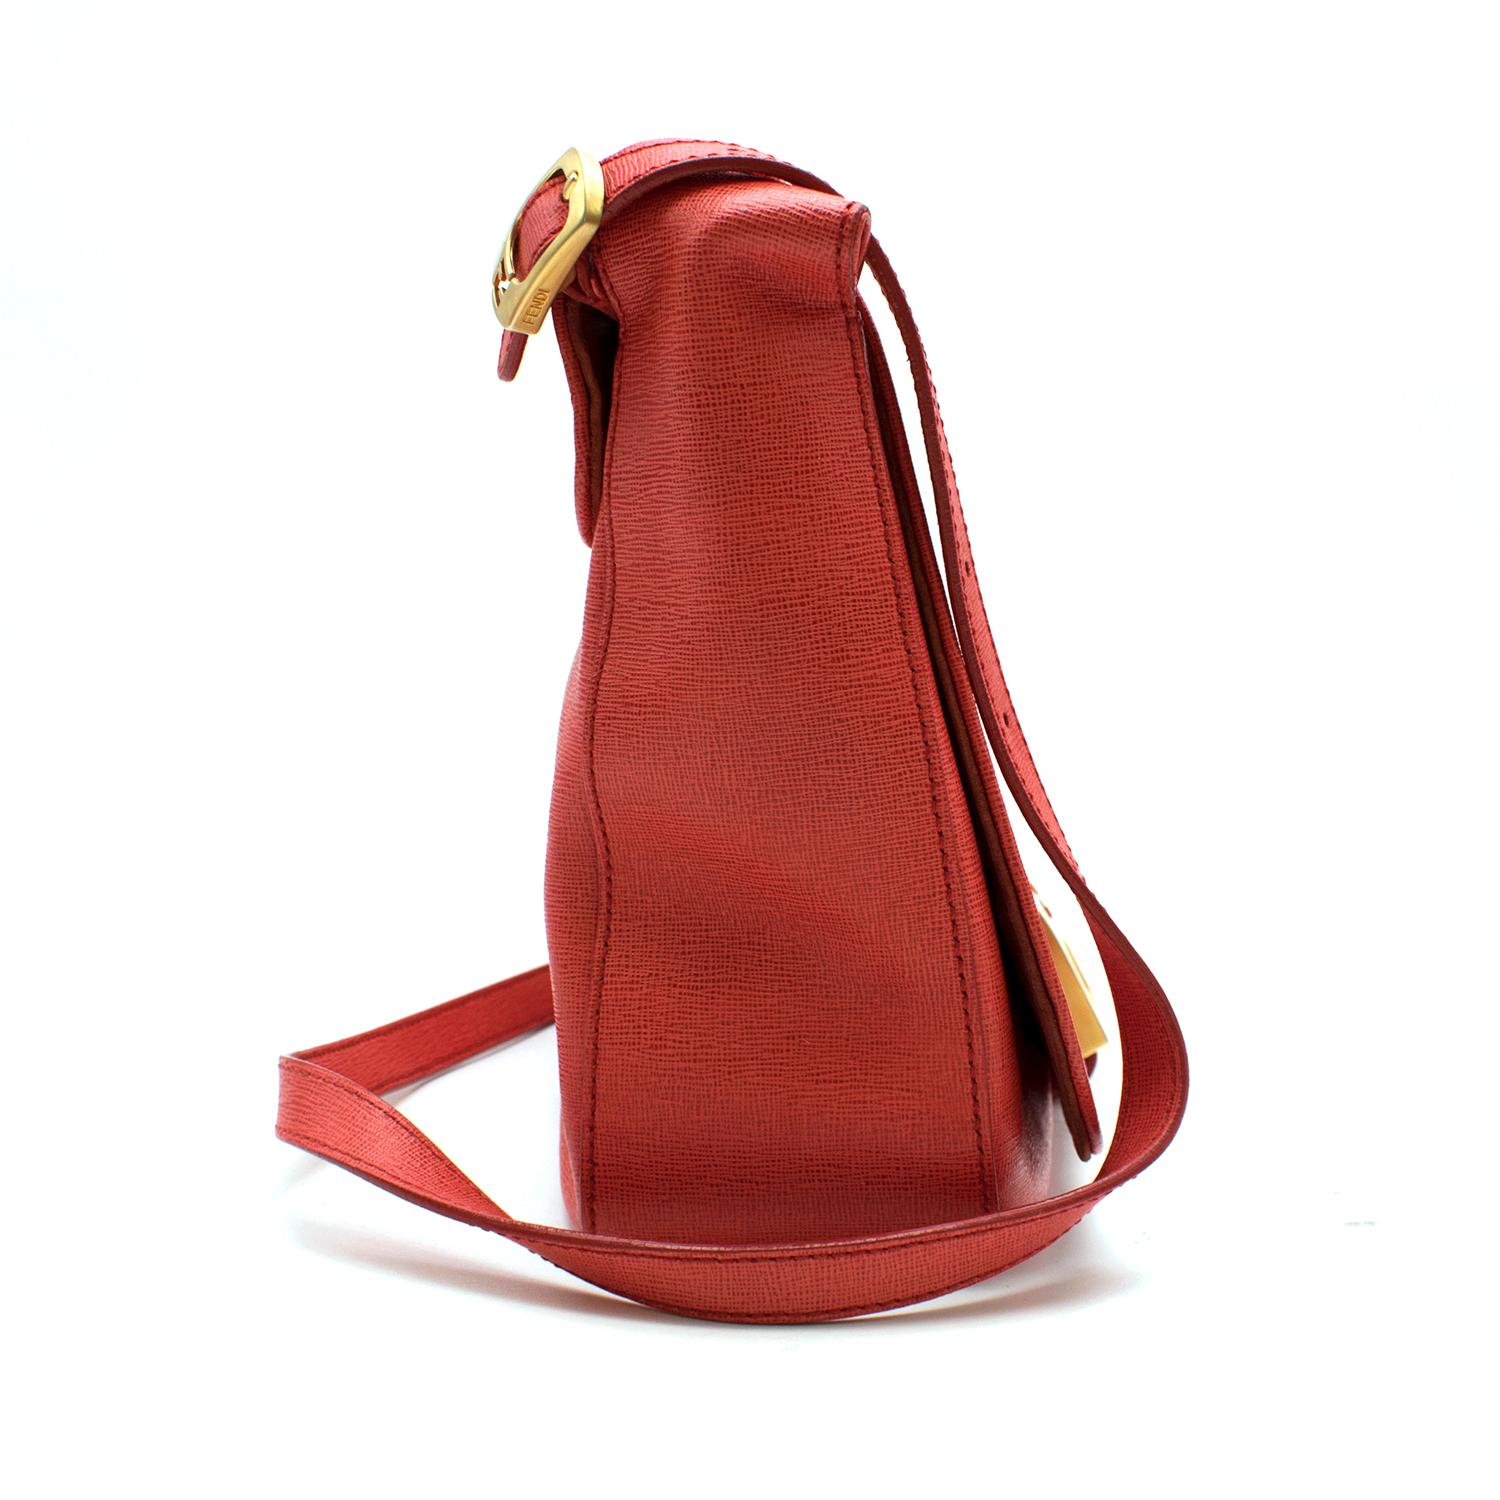 Fendi coral coated canvas crossbody fold-over bag.
The bag is lightweight and features gold toned hardware details. 
The interior is lined with monogrammed canvas and red suede and features one zipped pocket and two unzipped compartments.